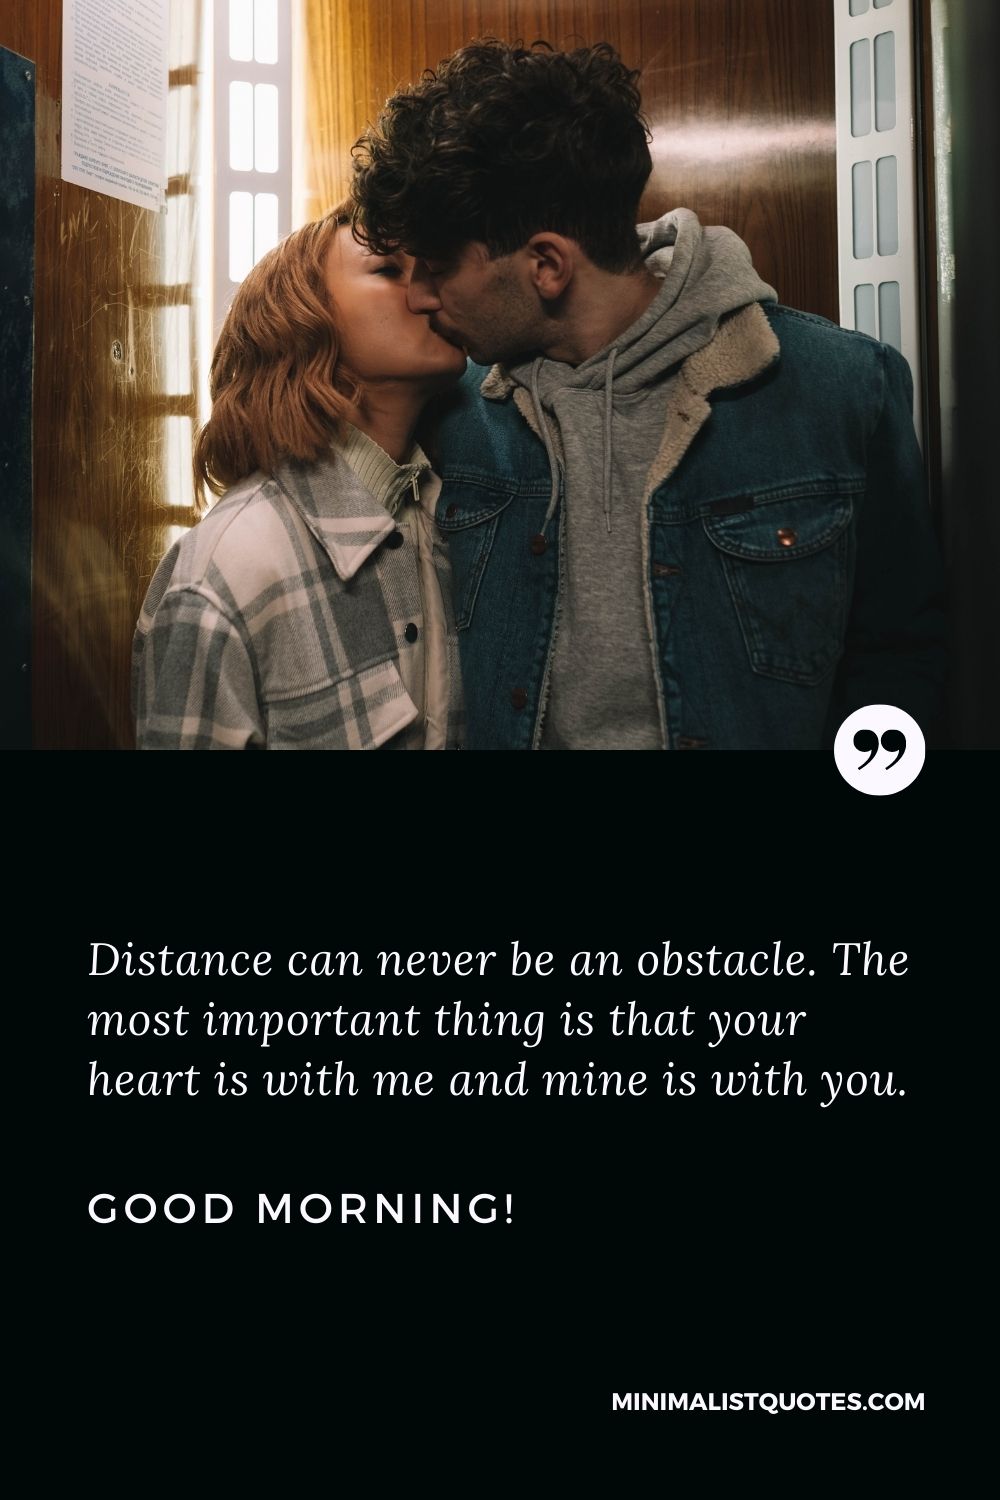 Good morning message for him long distance relationship: Distance can never be an obstacle. The most important thing is that your heart is with me and mine is with you. Good Morning!